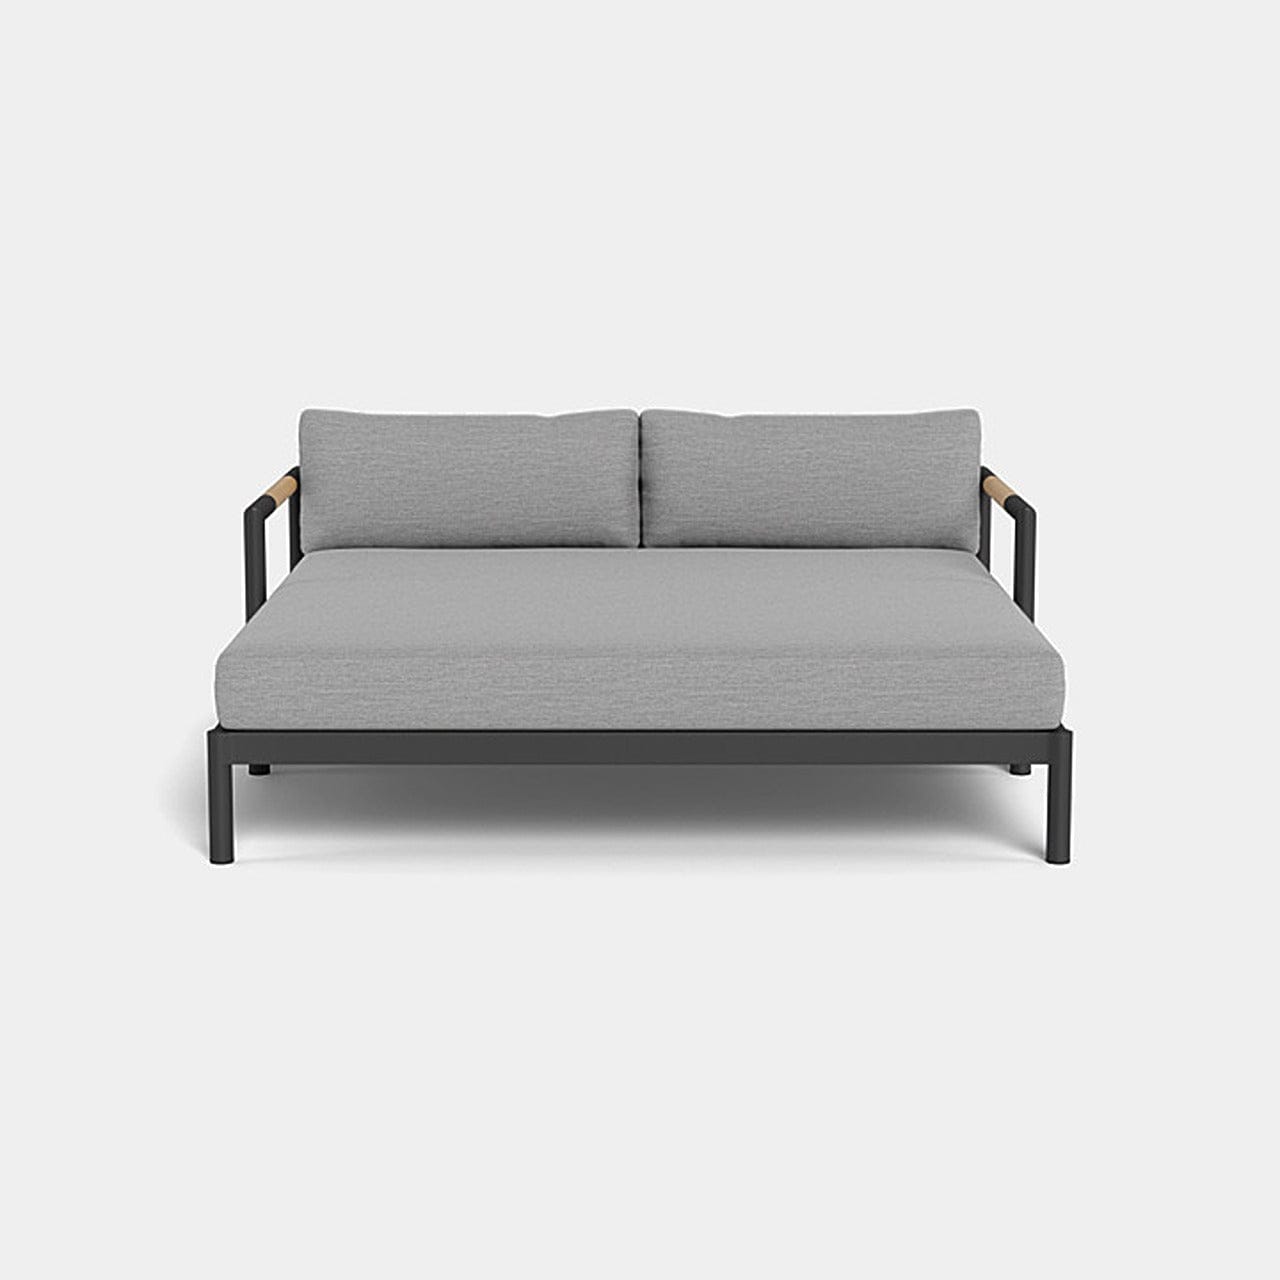 Breeze XL Daybed